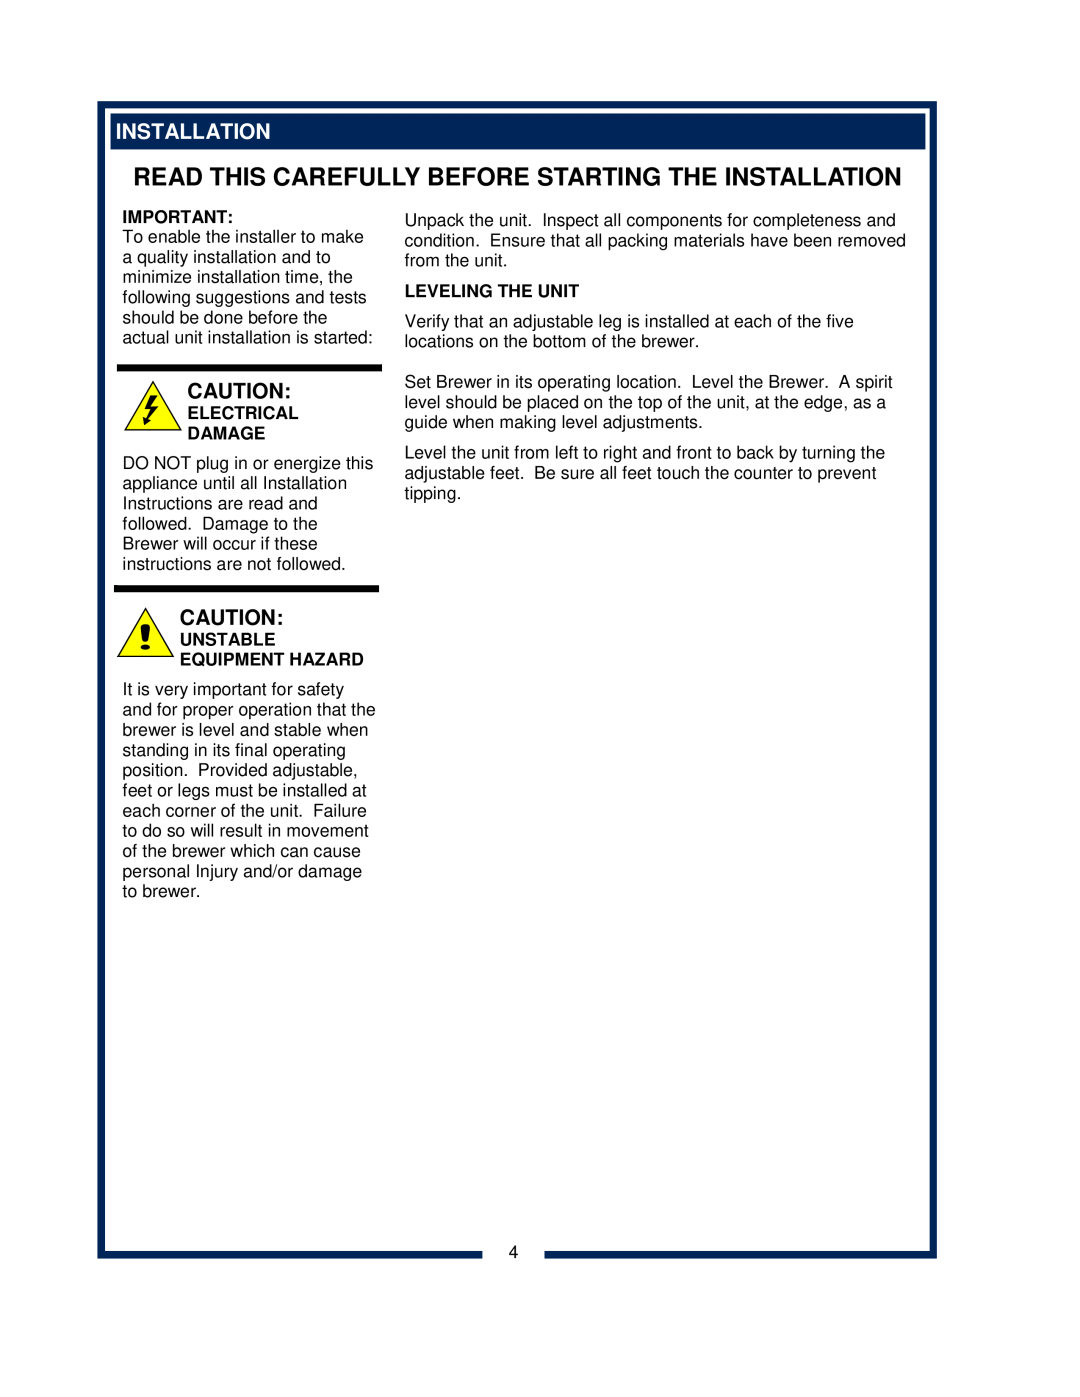 Bloomfield 9600 Single Cup Read This Carefully Before Starting The Installation, Electrical Damage, Leveling The Unit 